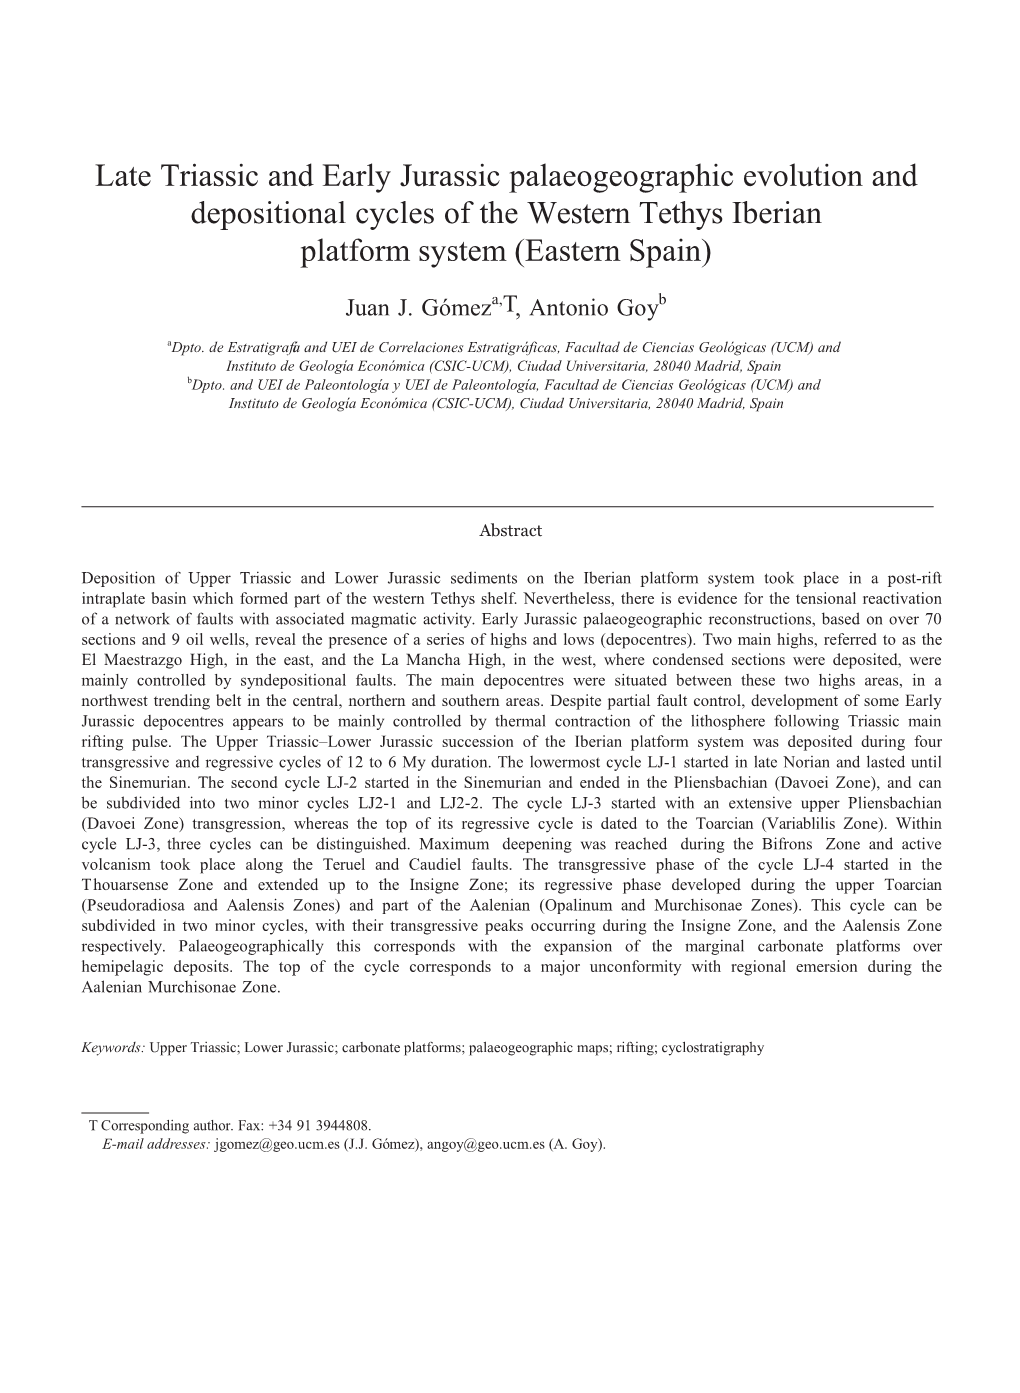 Late Triassic and Early Jurassic Palaeogeographic Evolution and Depositional Cycles of the Western Tethys Iberian Platform System (Eastern Spain)